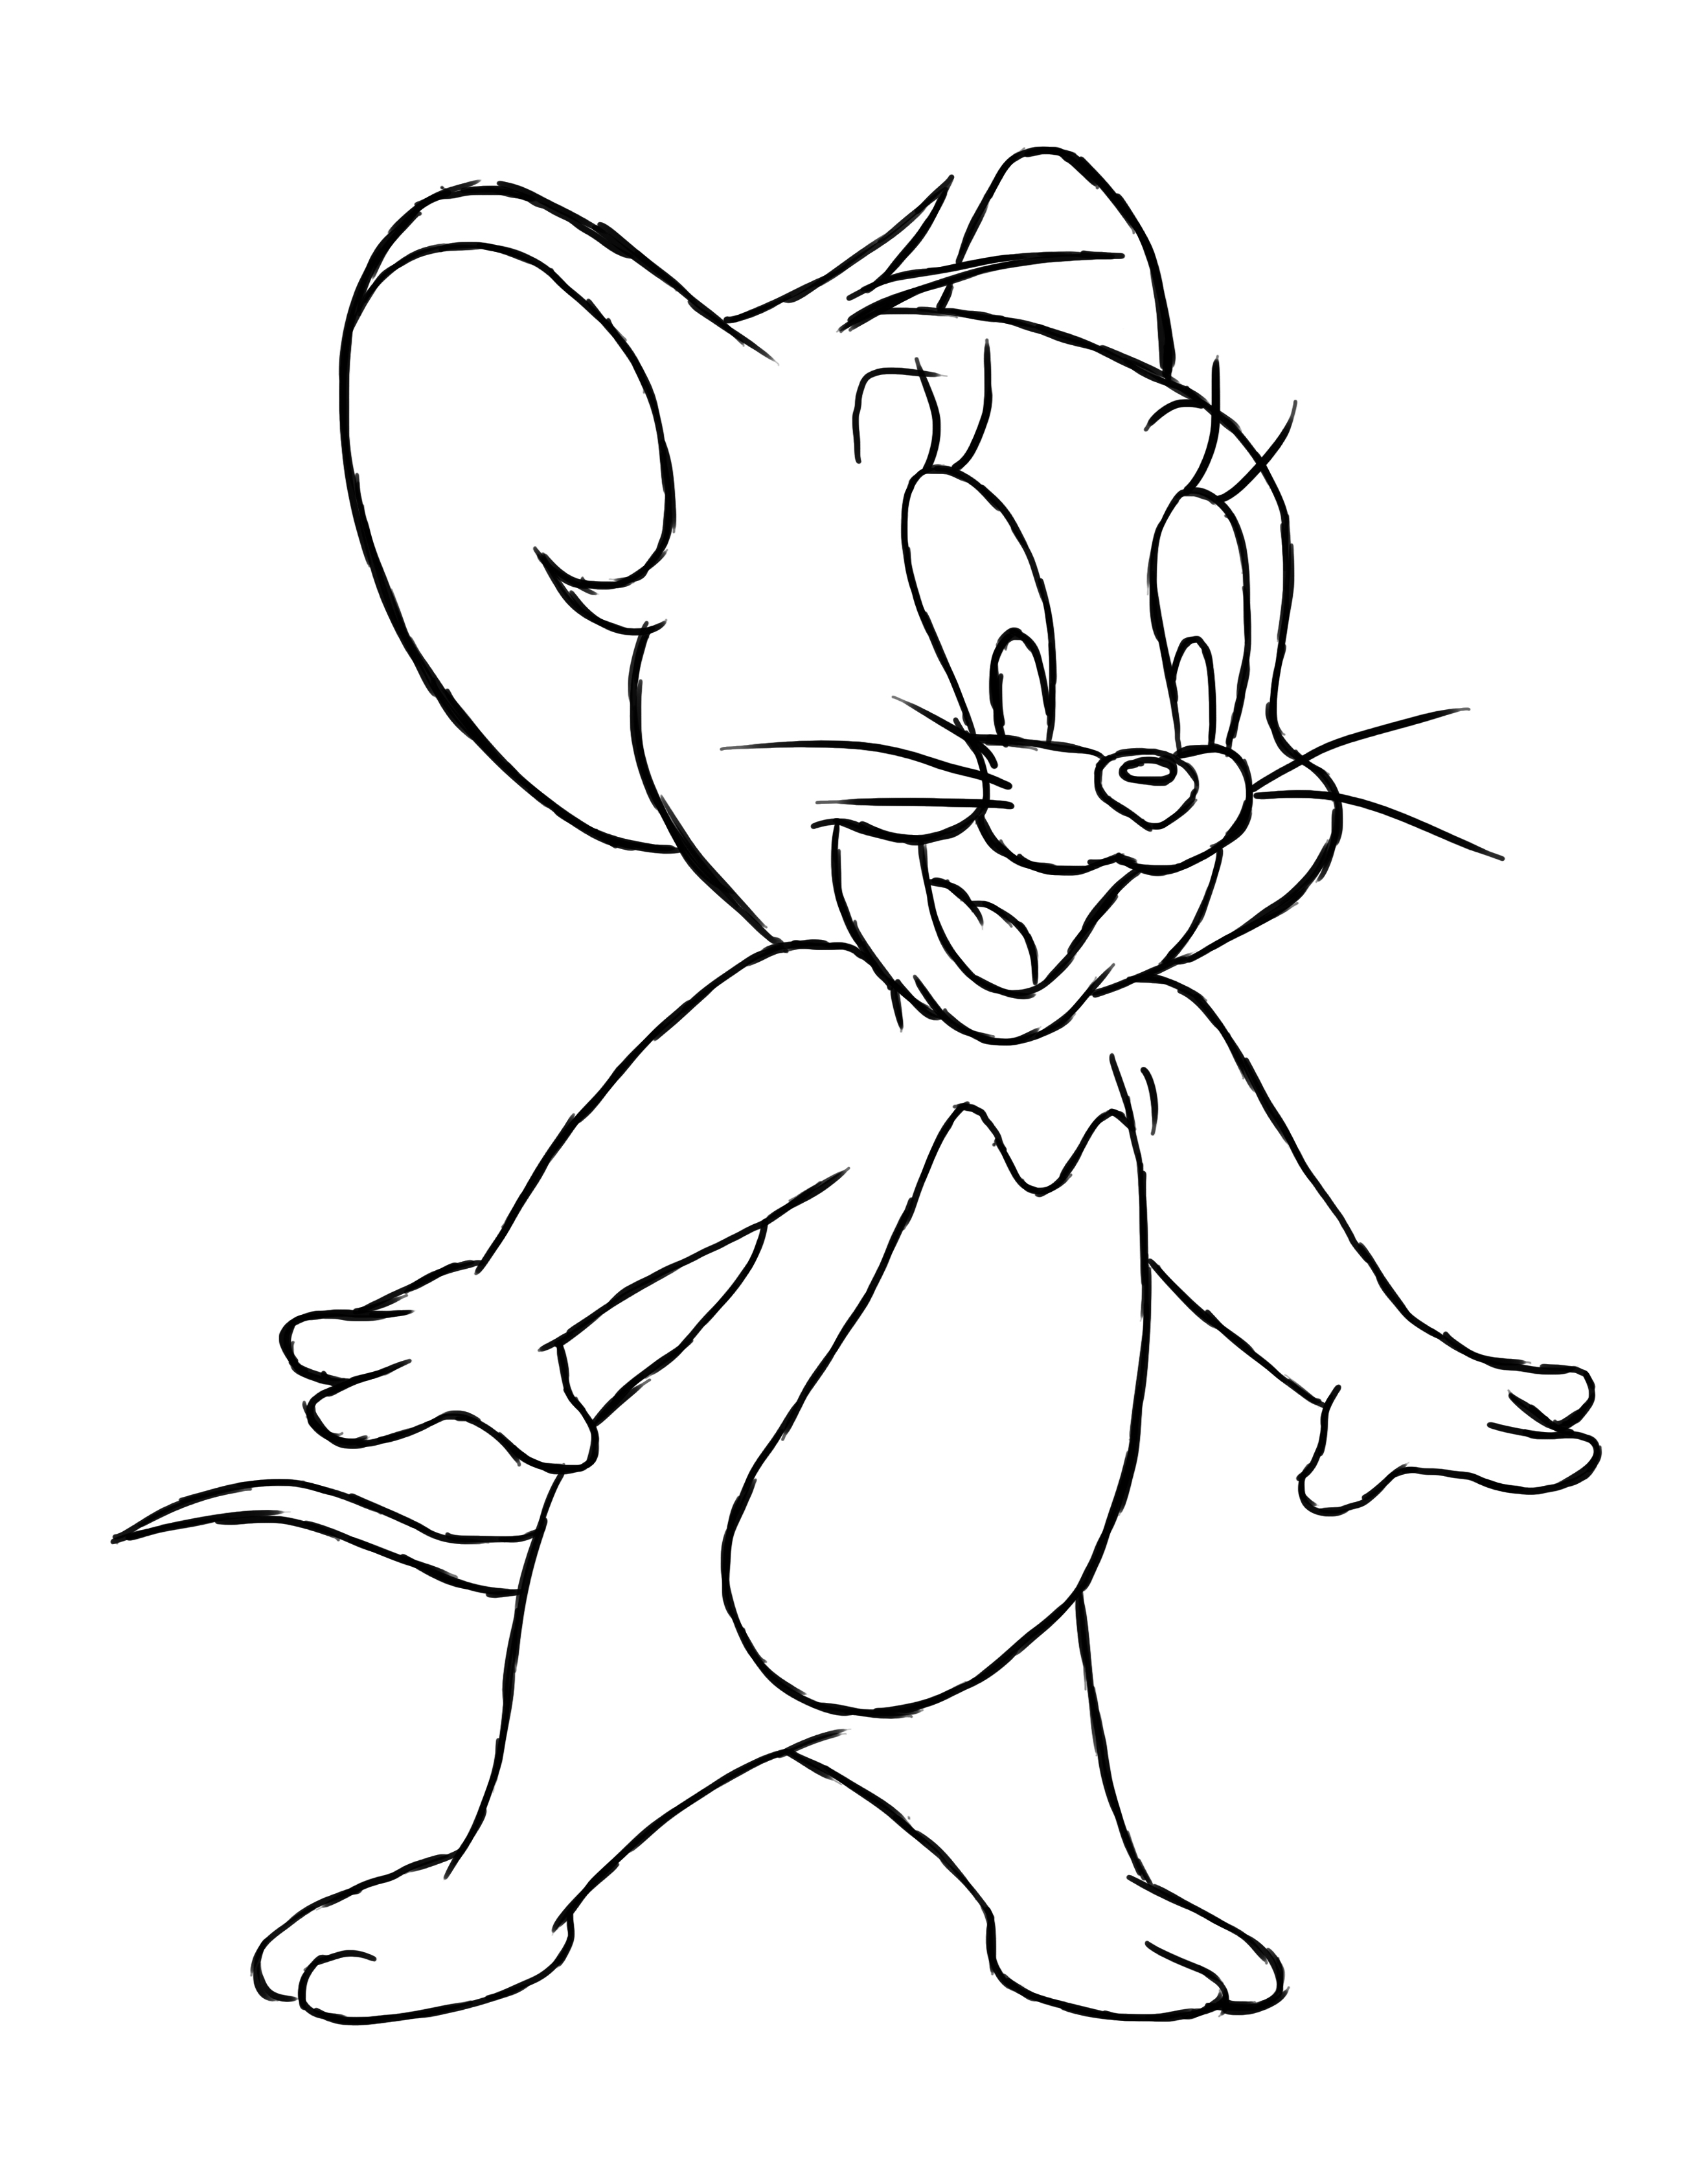 Tom and Jerry - Drawing Skill